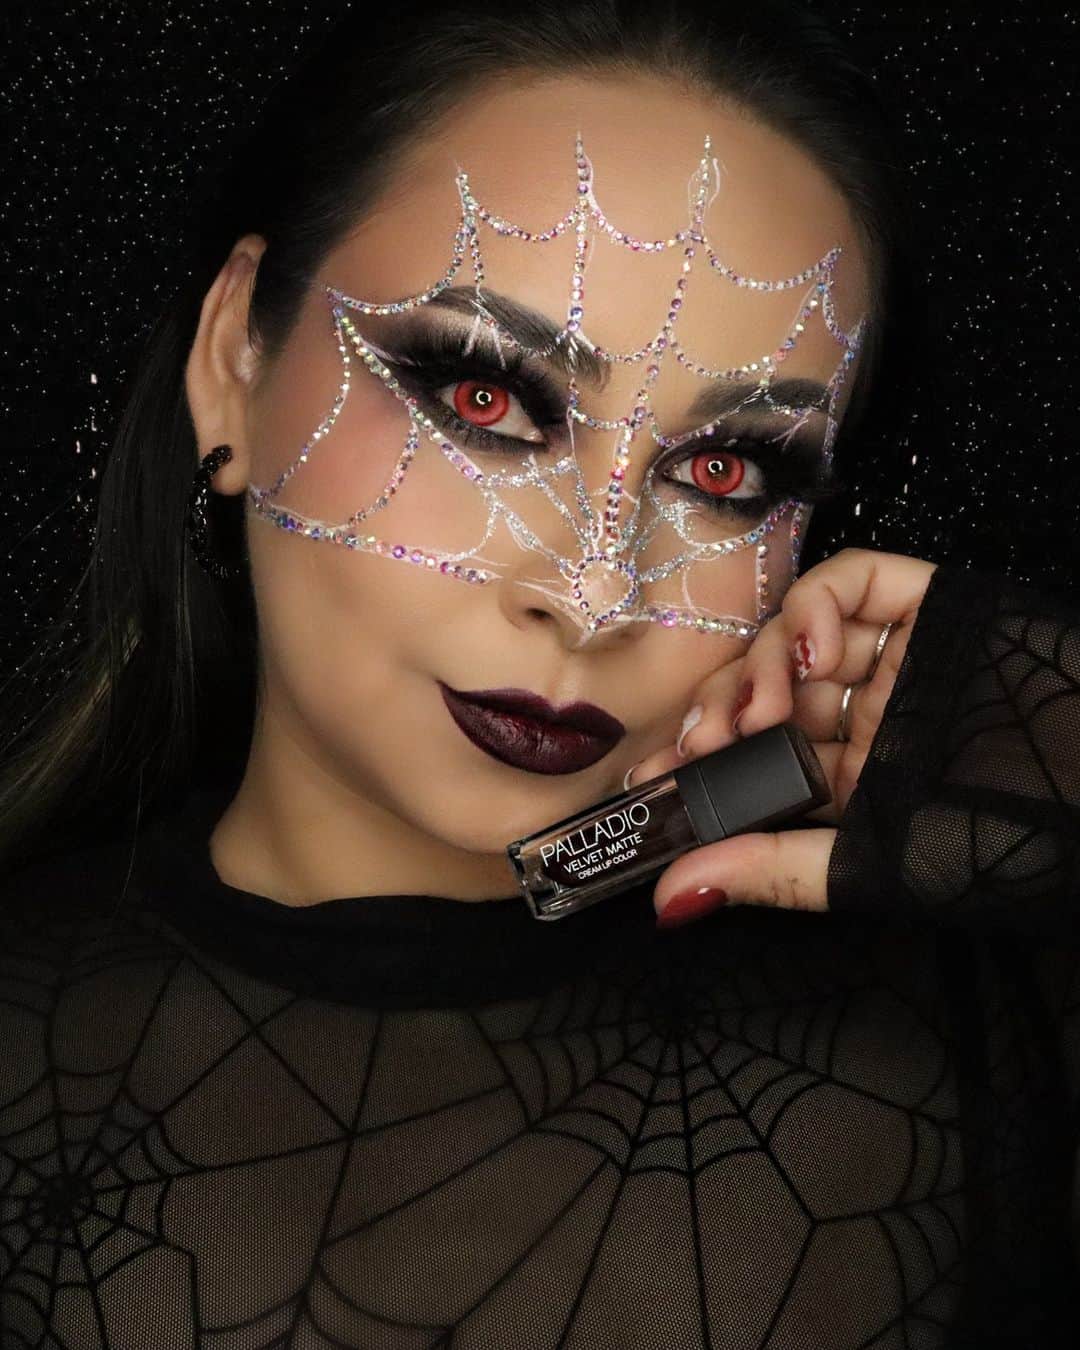 Palladio Beautyのインスタグラム：「Palladio products have brought the Halloween glam to life in this makeup look! Check out @jesiika89 stunning look 👻💄  #spookylooks #halloweenmakeuptutorial #halloweenlook #PalladioBeauty #tutorial #makeuptutorial」